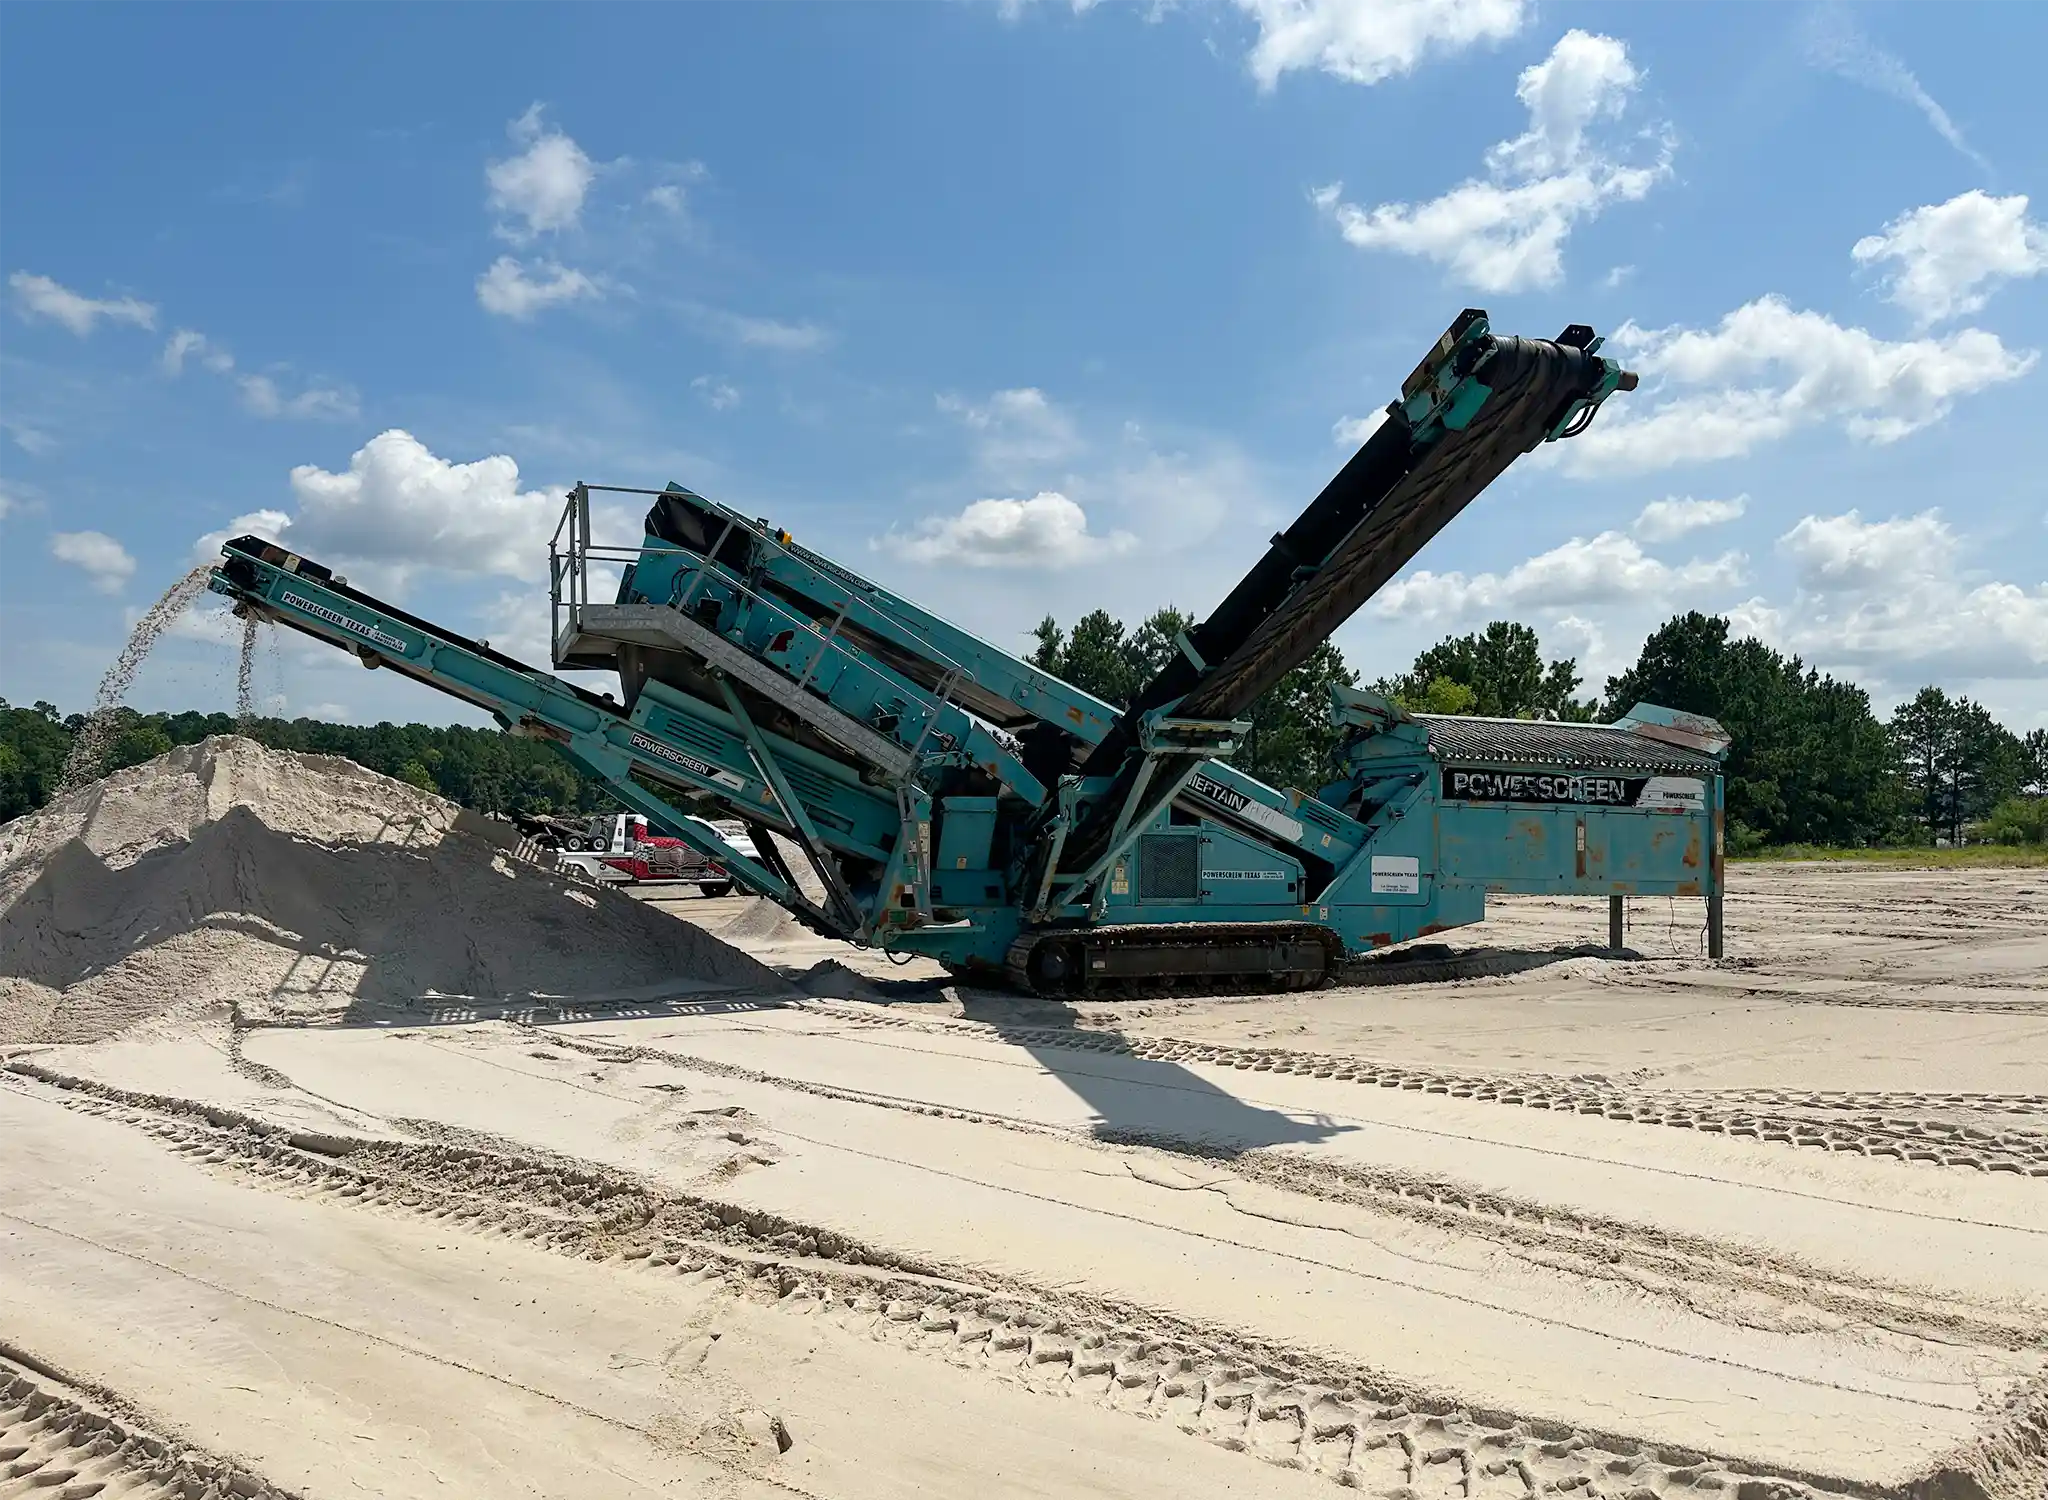 A power screener machine at work processing a batch of sand into piles.